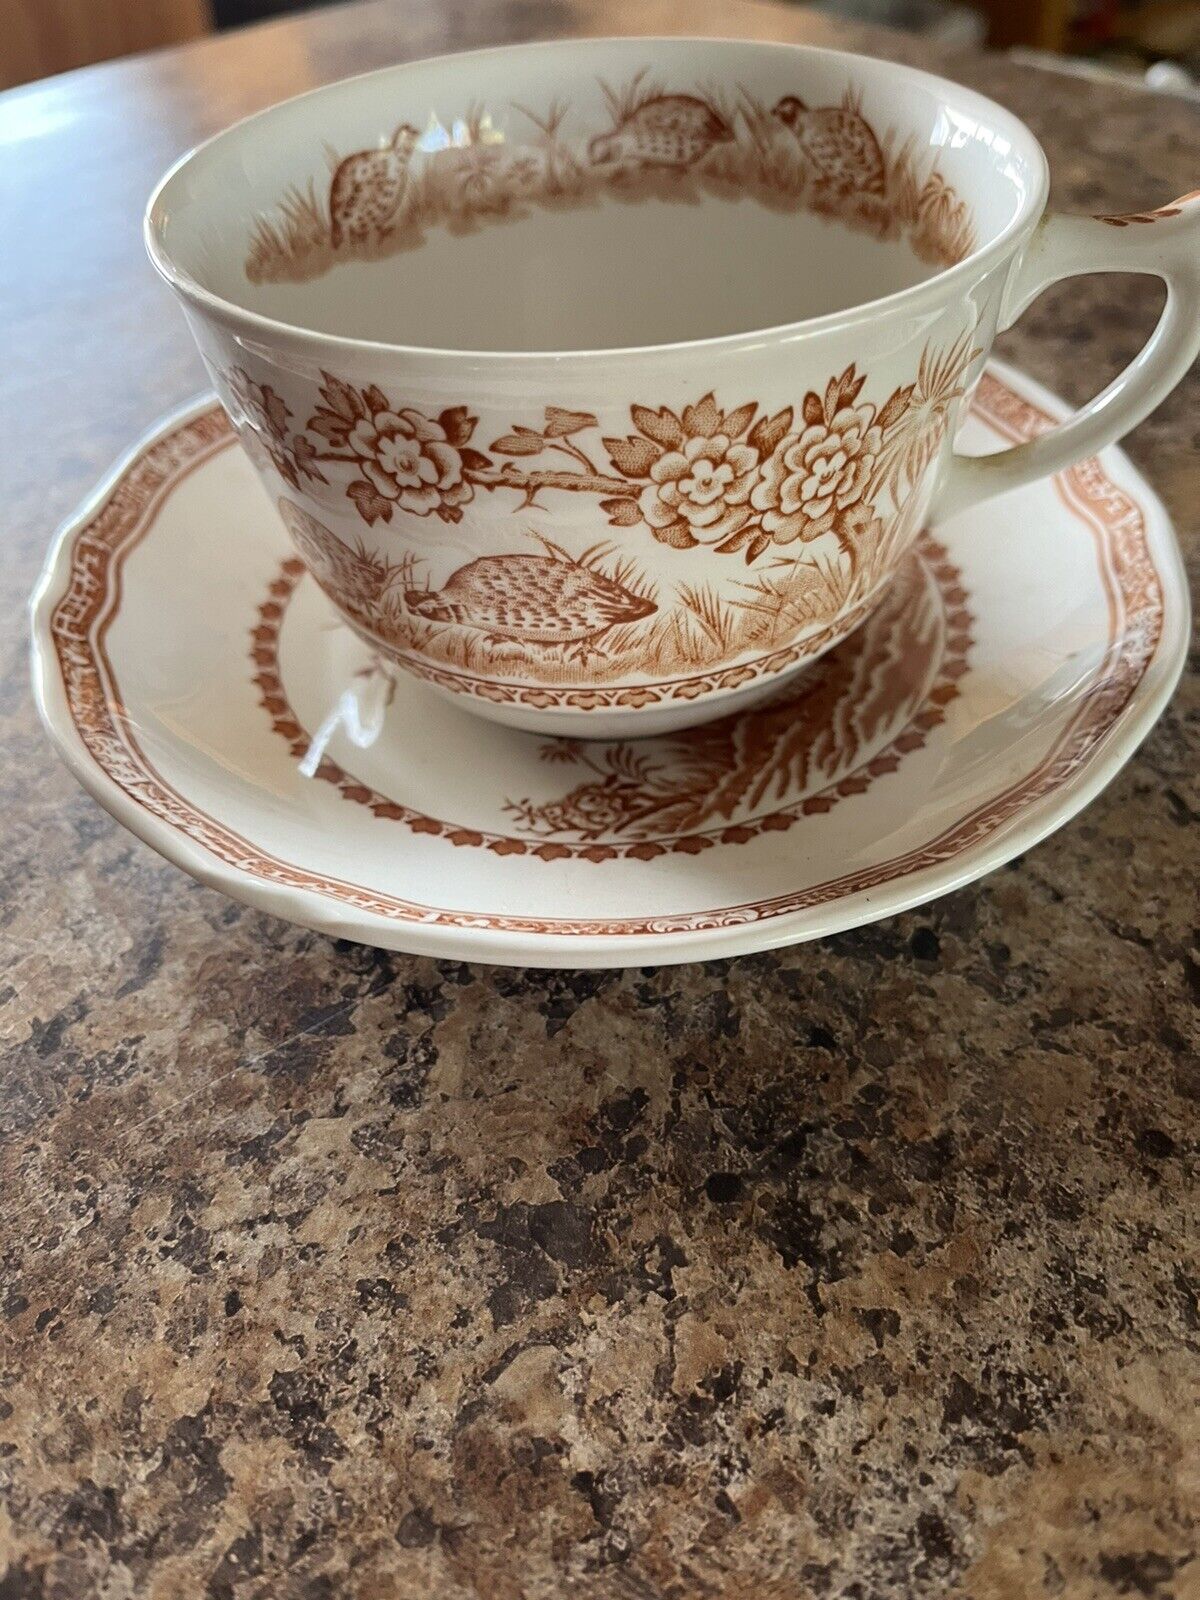 Furnivals 1913 Brown Transferware Quail Breakfast Cup and Saucer